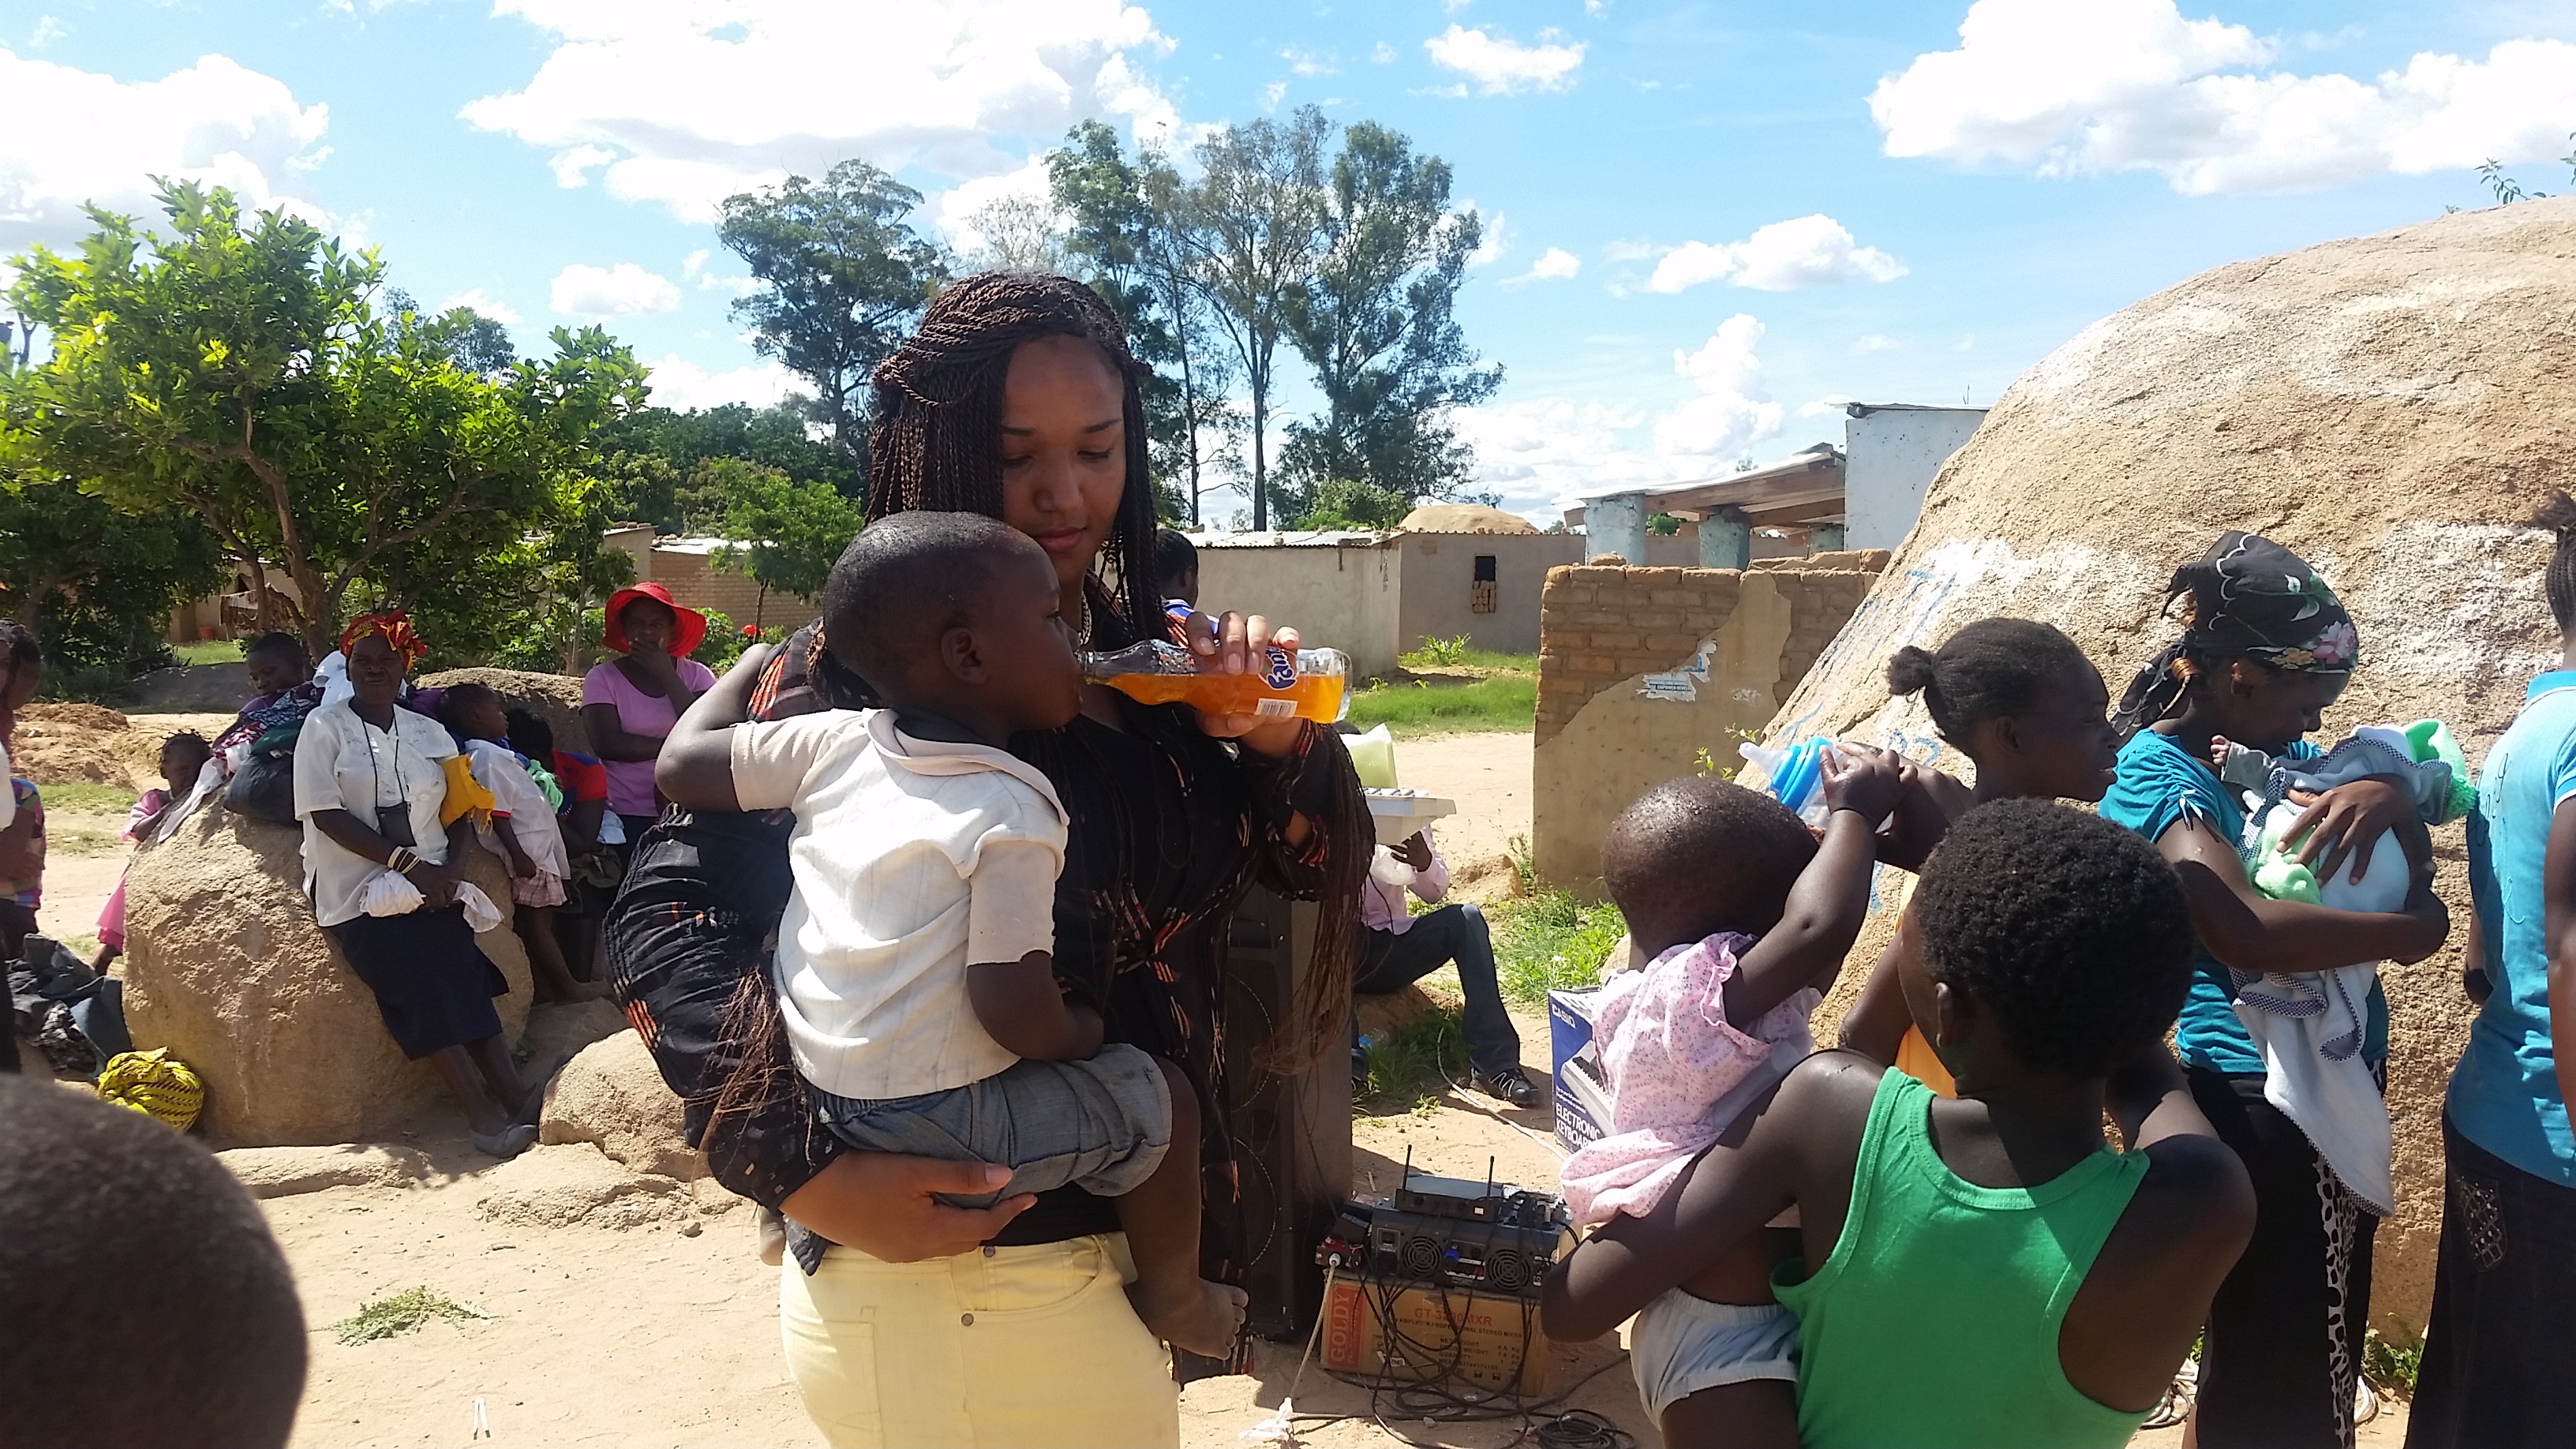 Mama Nelly shares a refreshing bottle of Fanta with one of the children